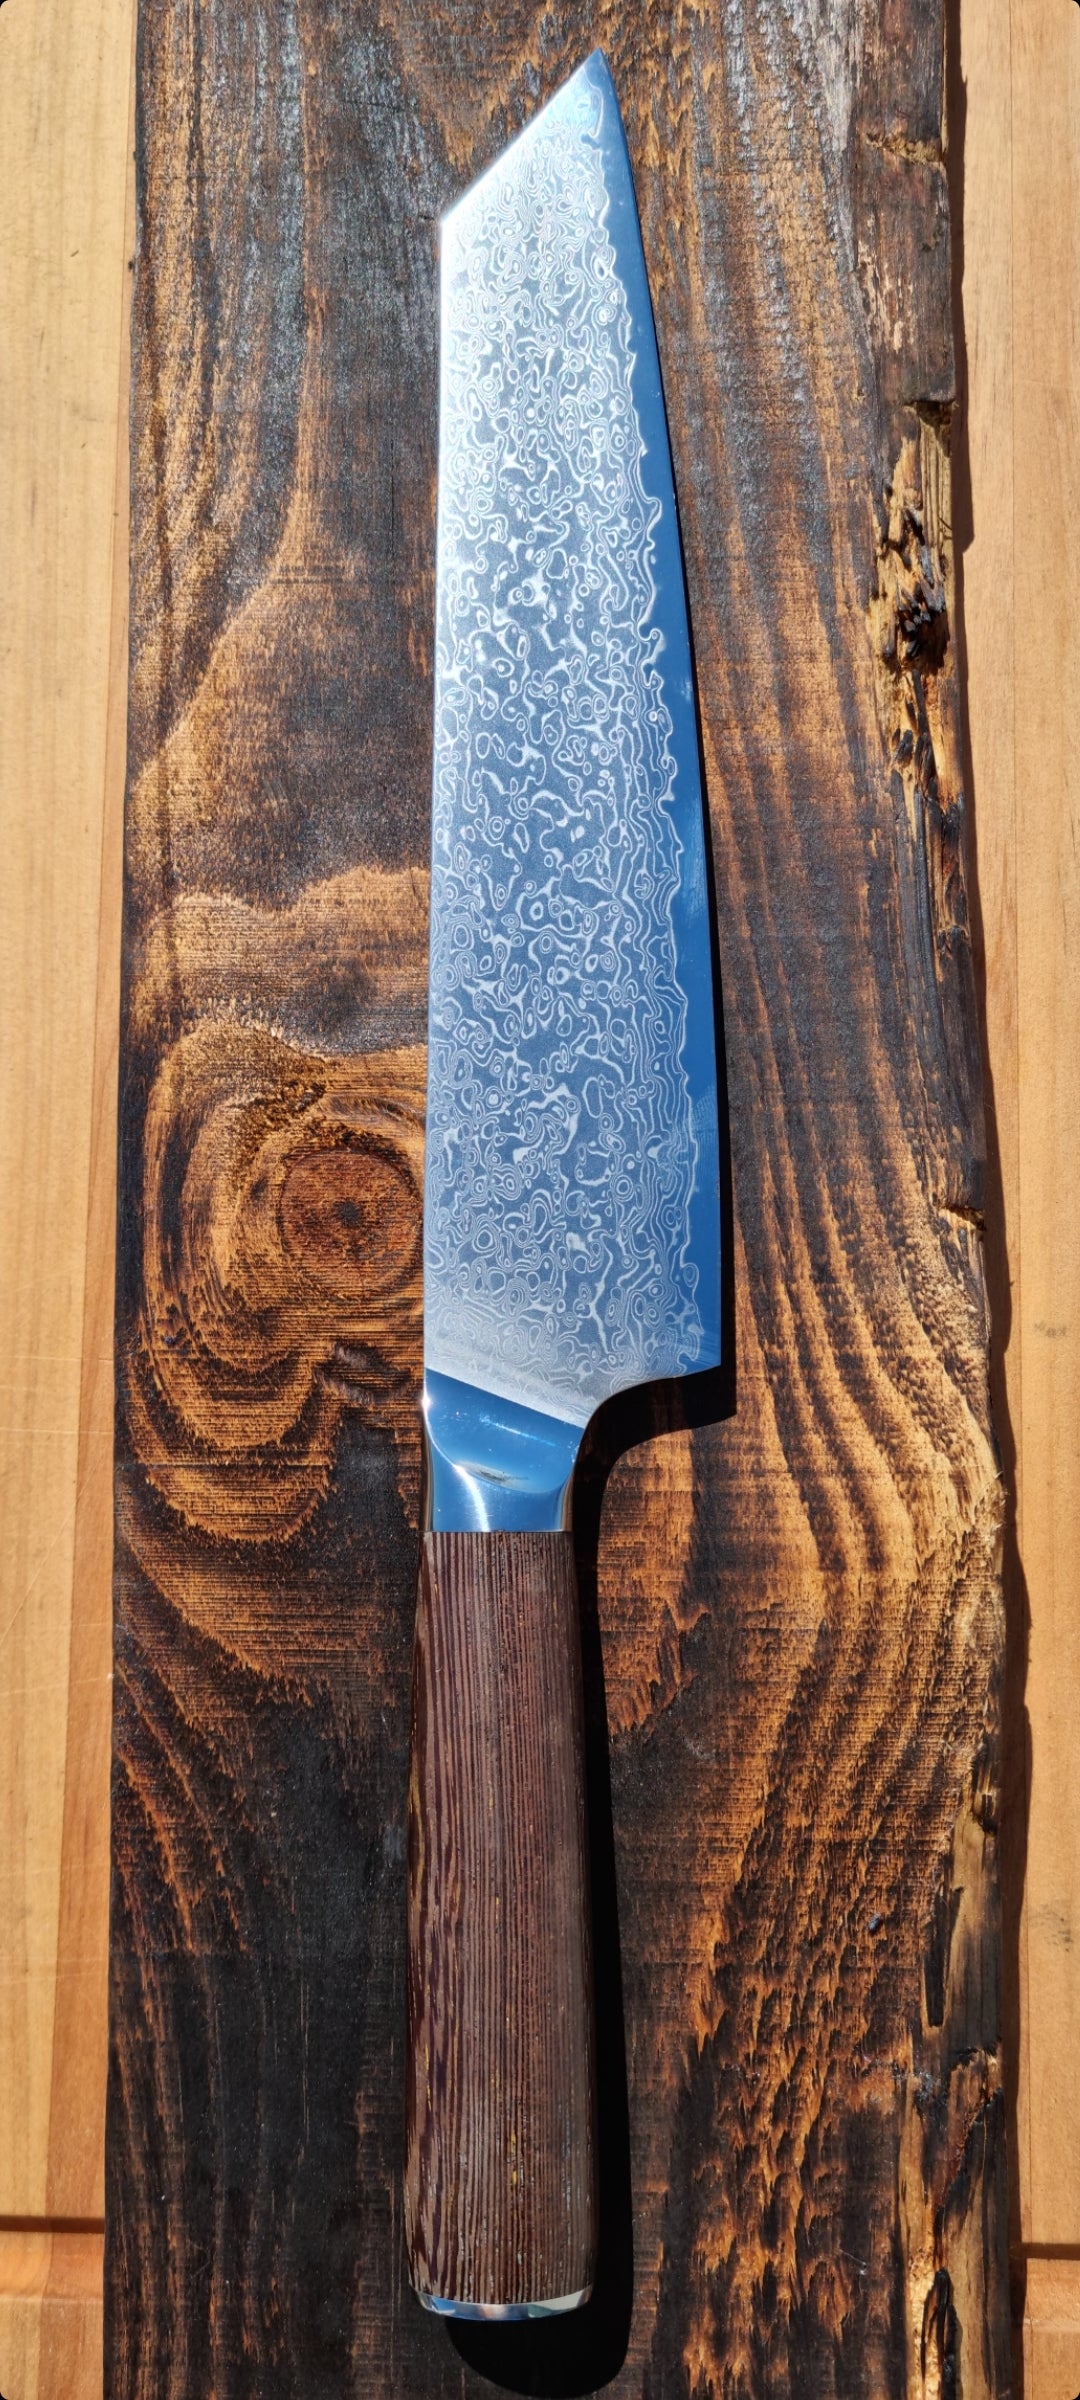 Japanese Style Damascus Steel Layered Knives